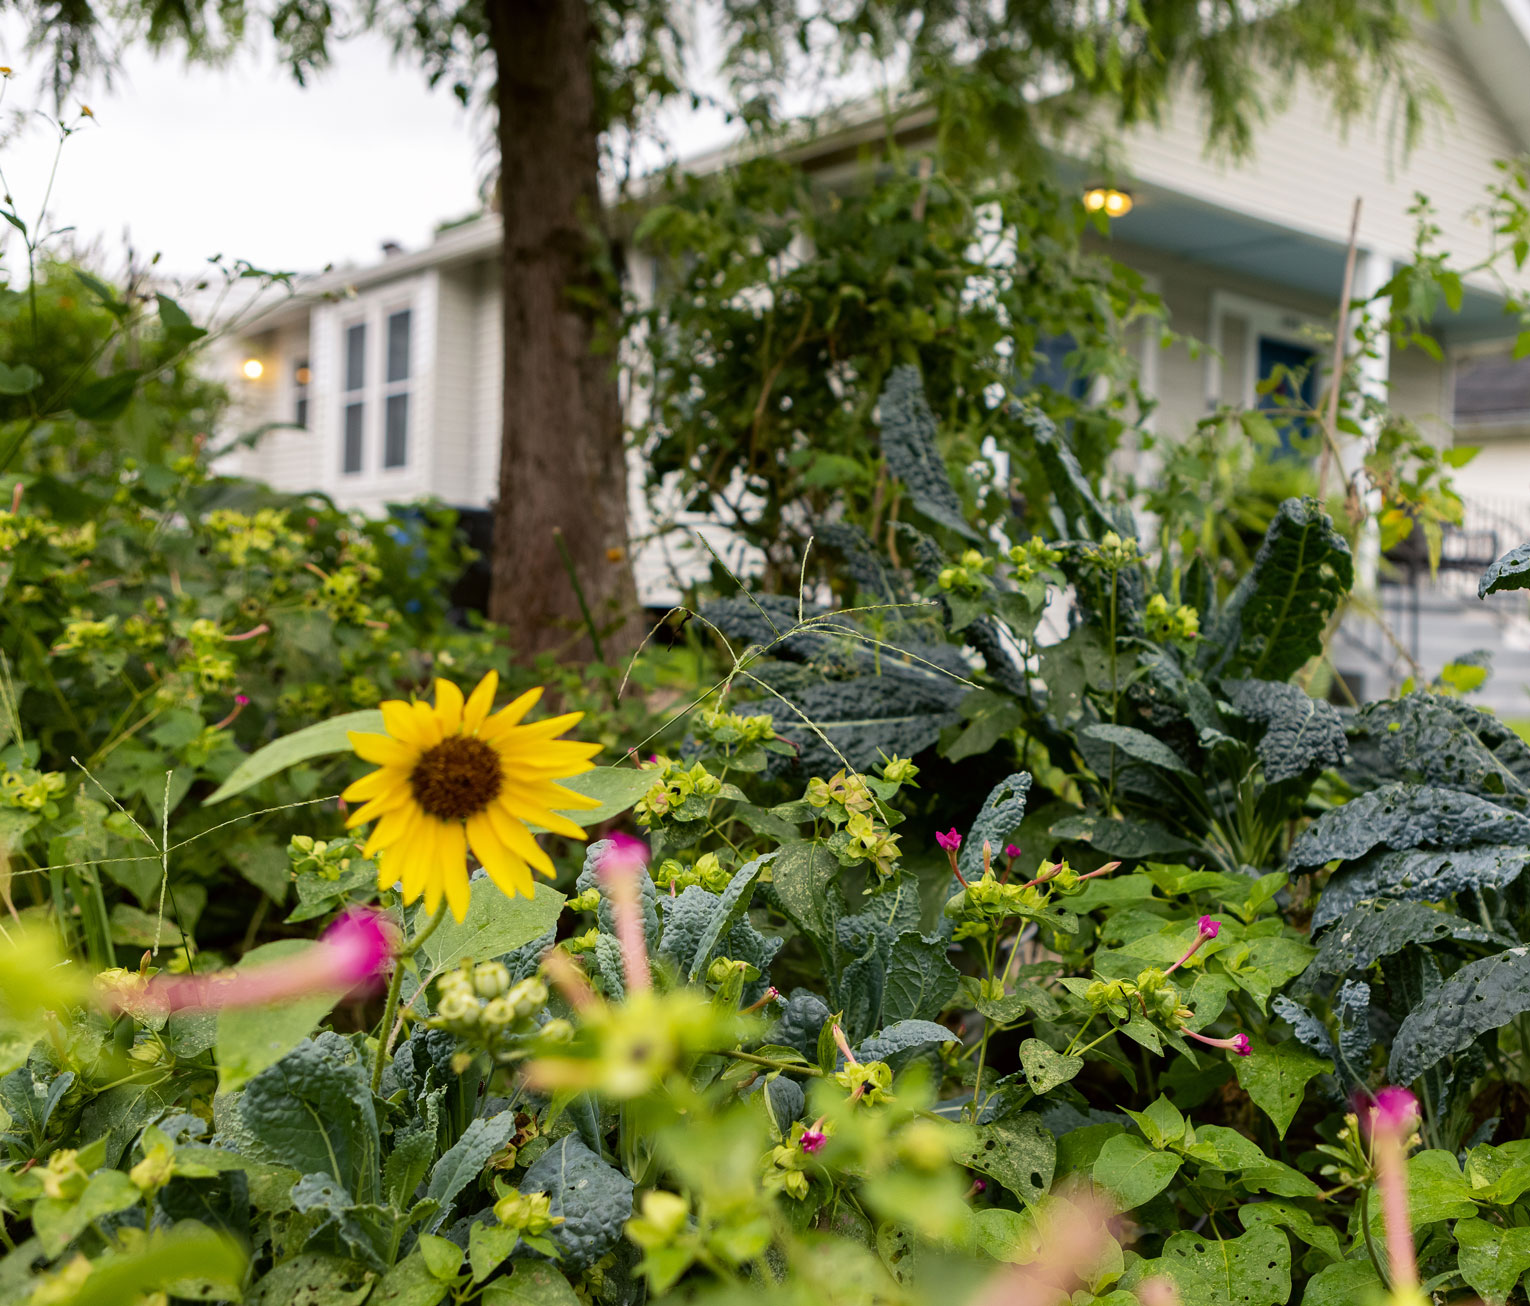 Photo of garden with kale, sunflowers, and other vegetables and flowers.